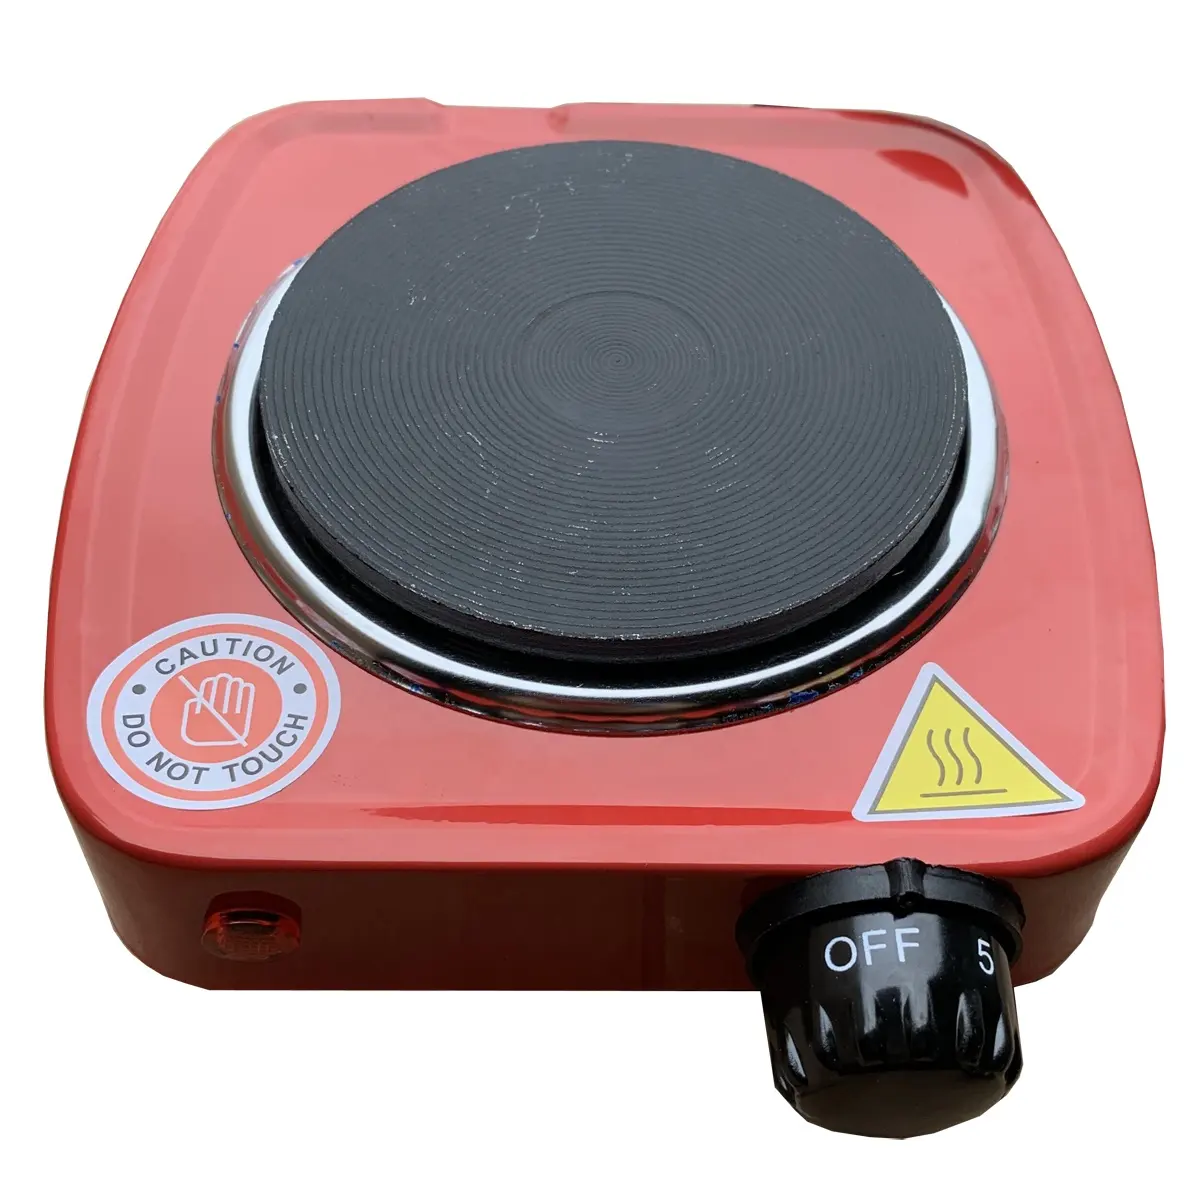 mini 500w hot plate,small electric stove,coffee maker burner cooking